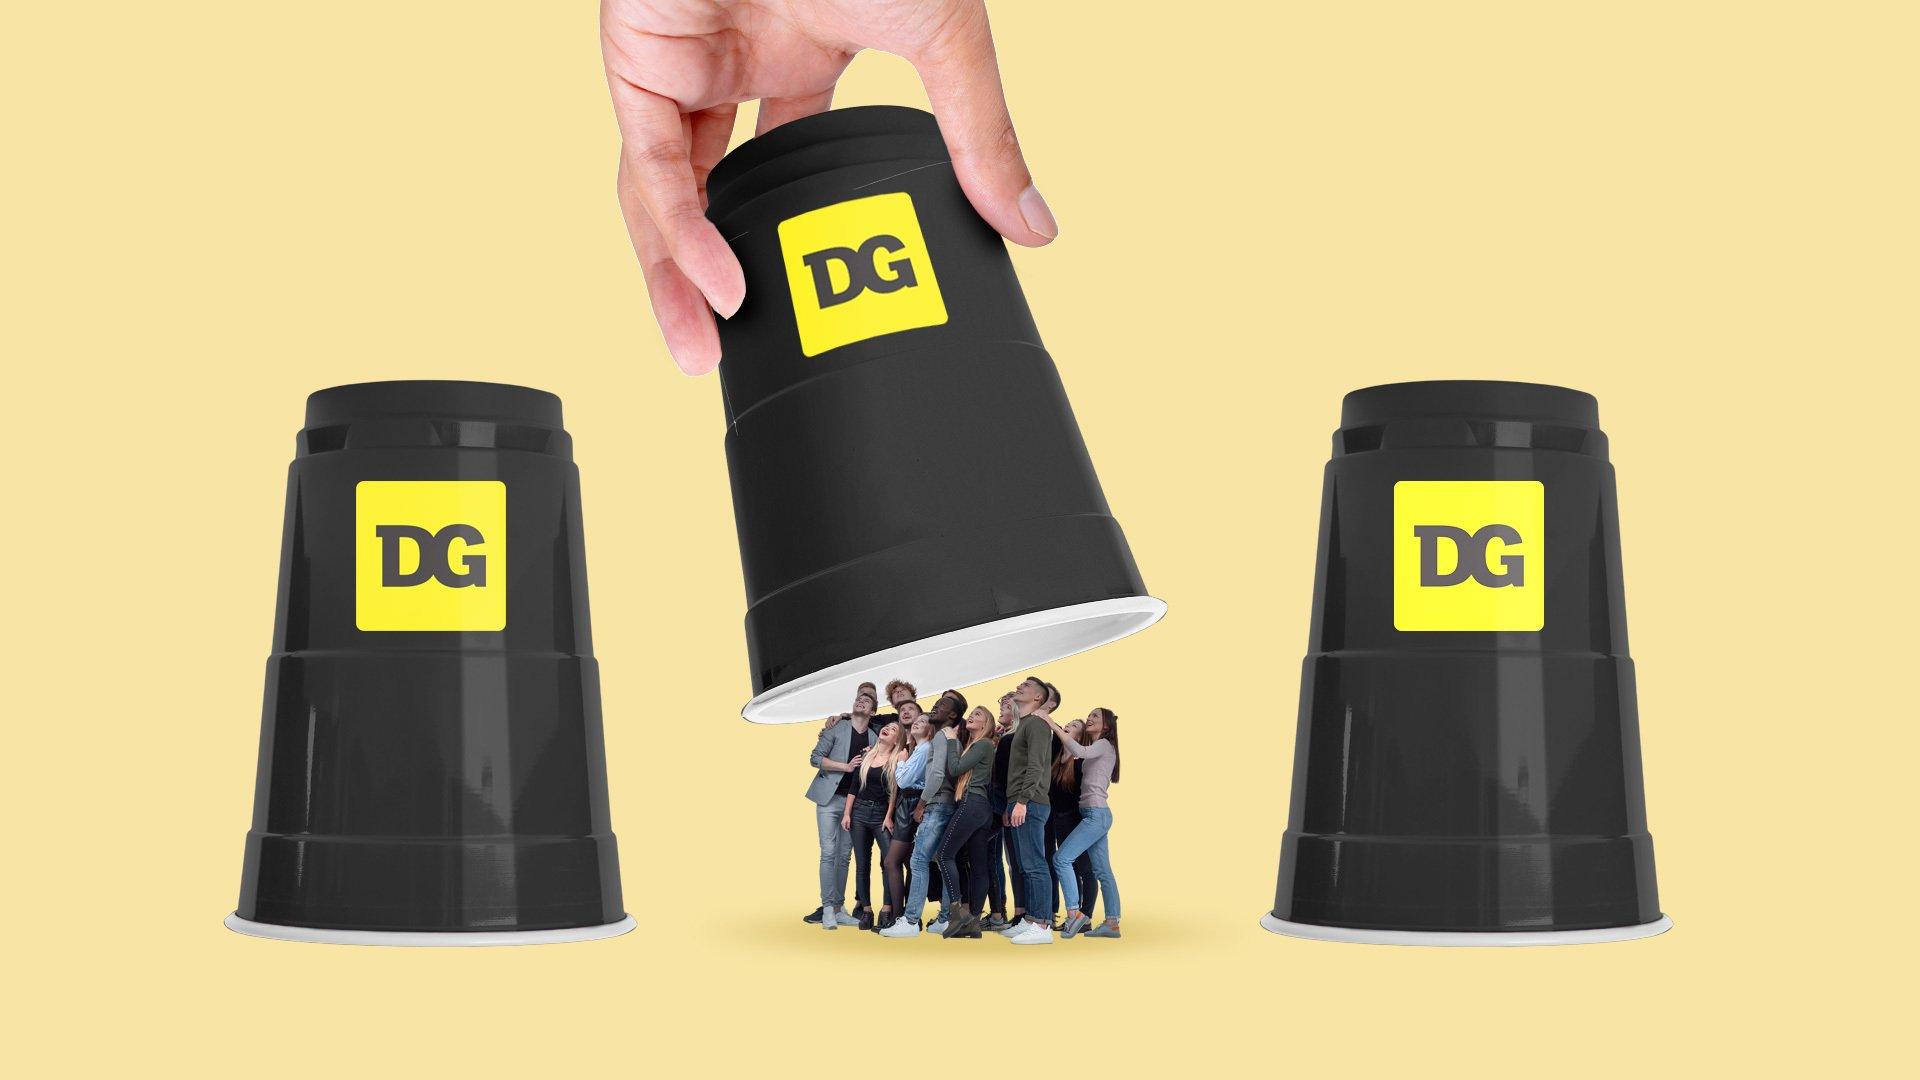 Image shows three black plastic cups with "DG" (Dollar General logo), while a hand picks up the middle cup, exposing a crowd of people.